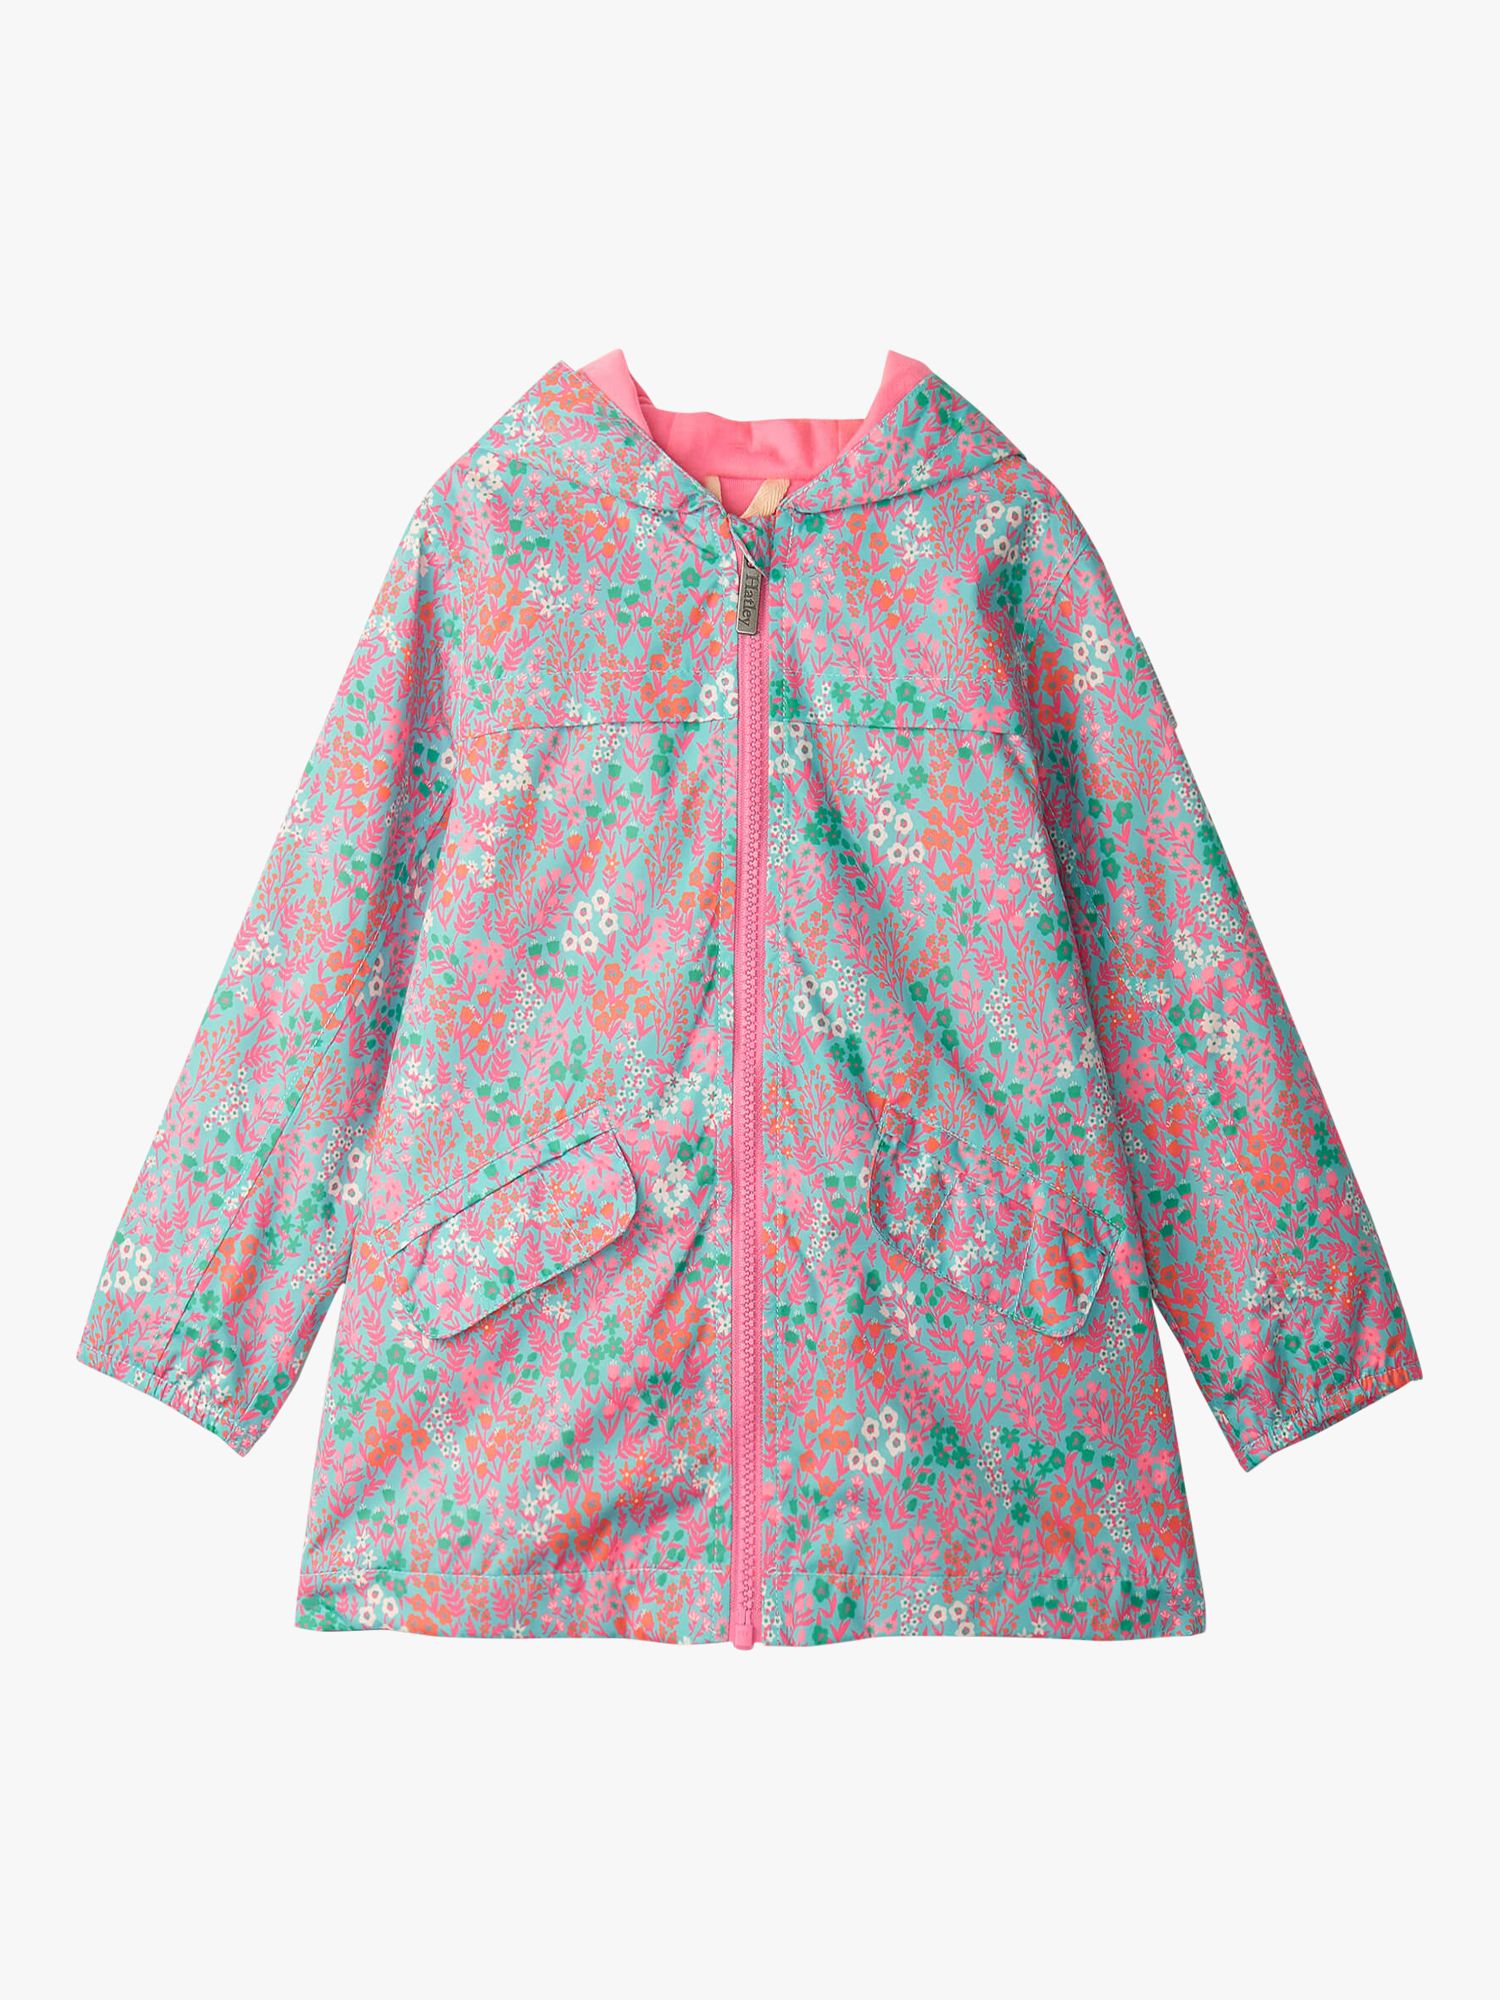 Hatley Kids' Ditsy Floral Spring Field Hooded Jacket, Blue Curacao, 2 years